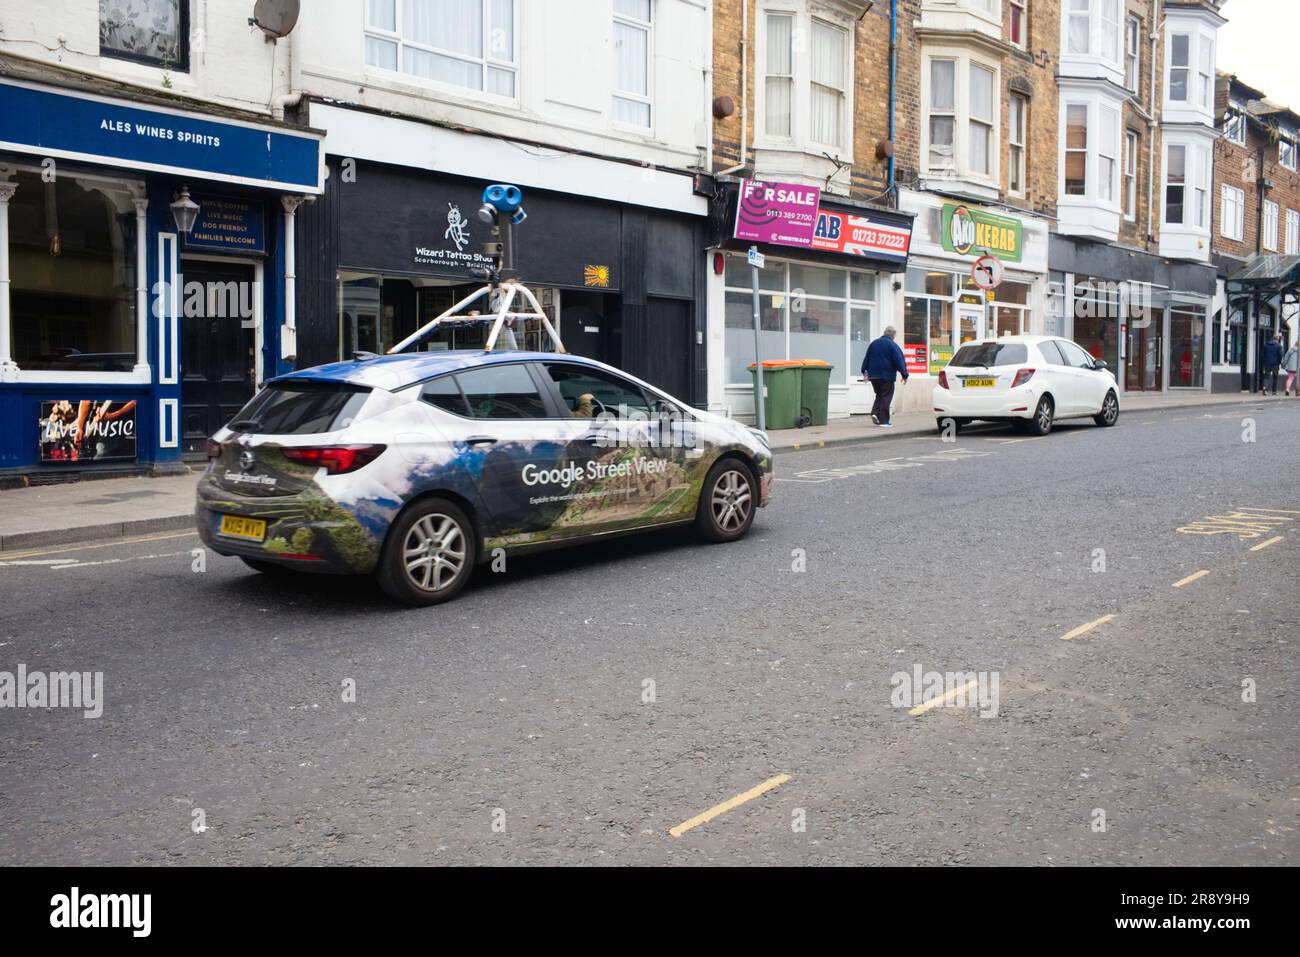 A speedy Google Street View car in the centre of Scarborough Stock Photo